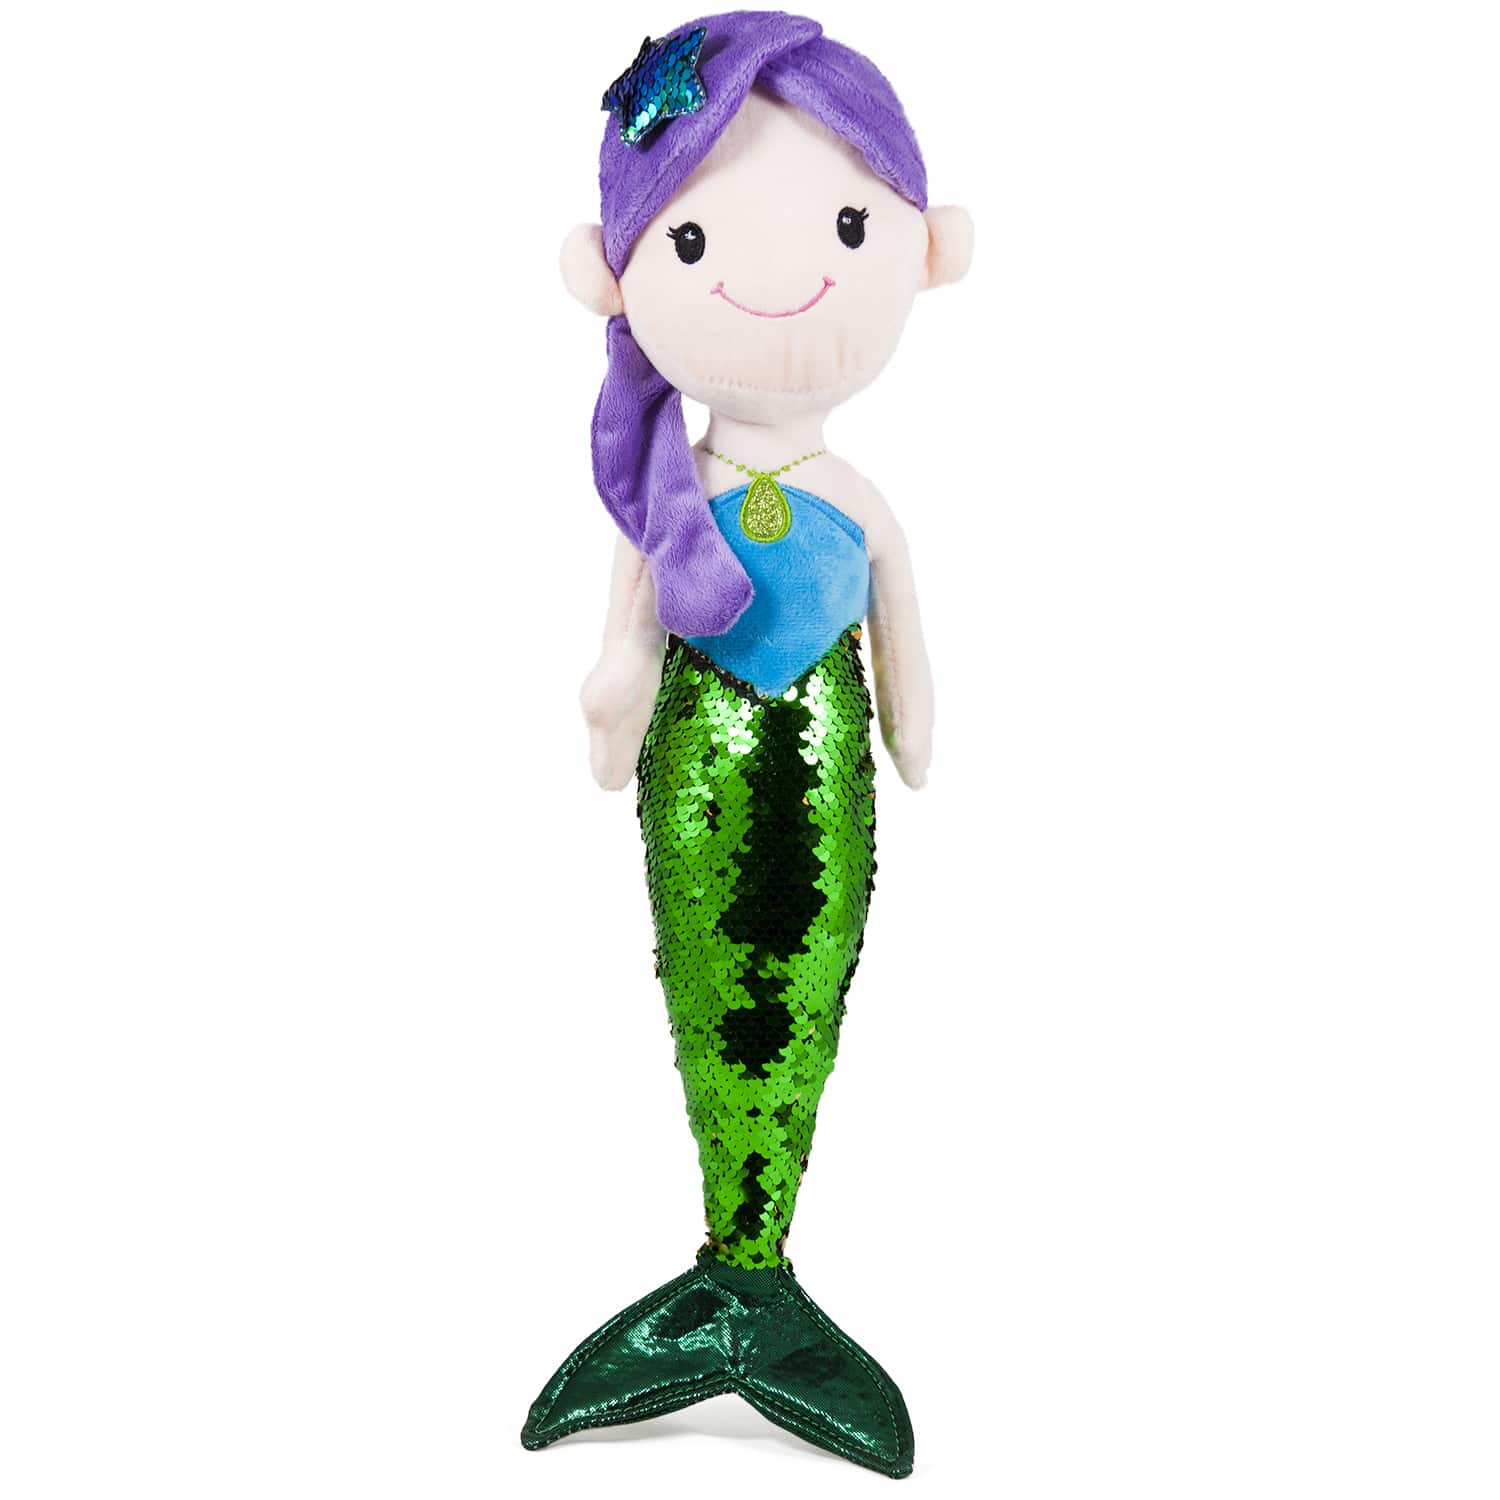 Mermaid with sequins - Green